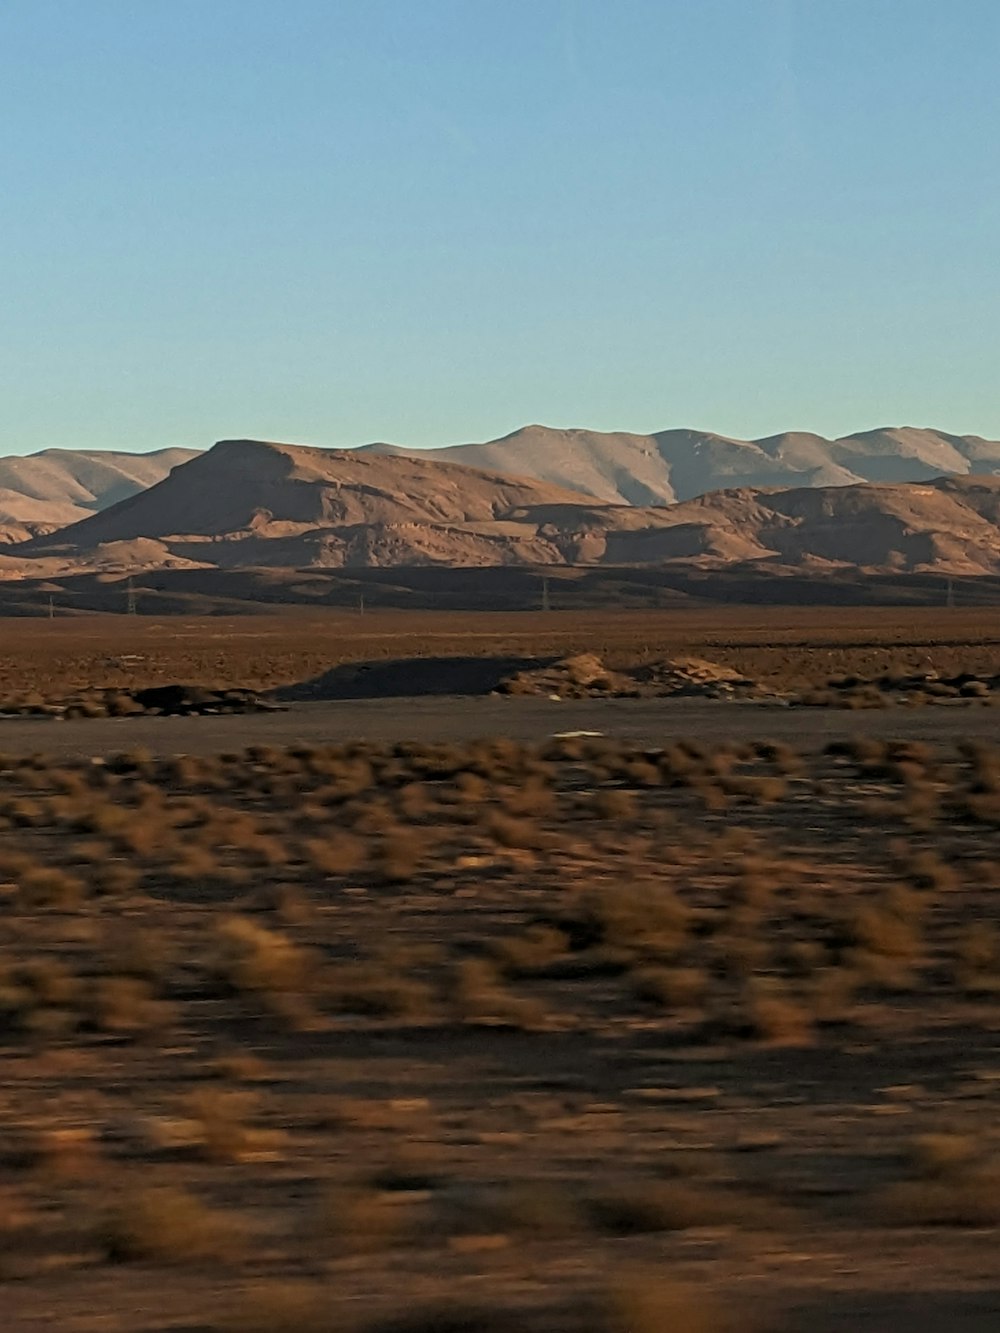 a person riding a horse in the middle of the desert